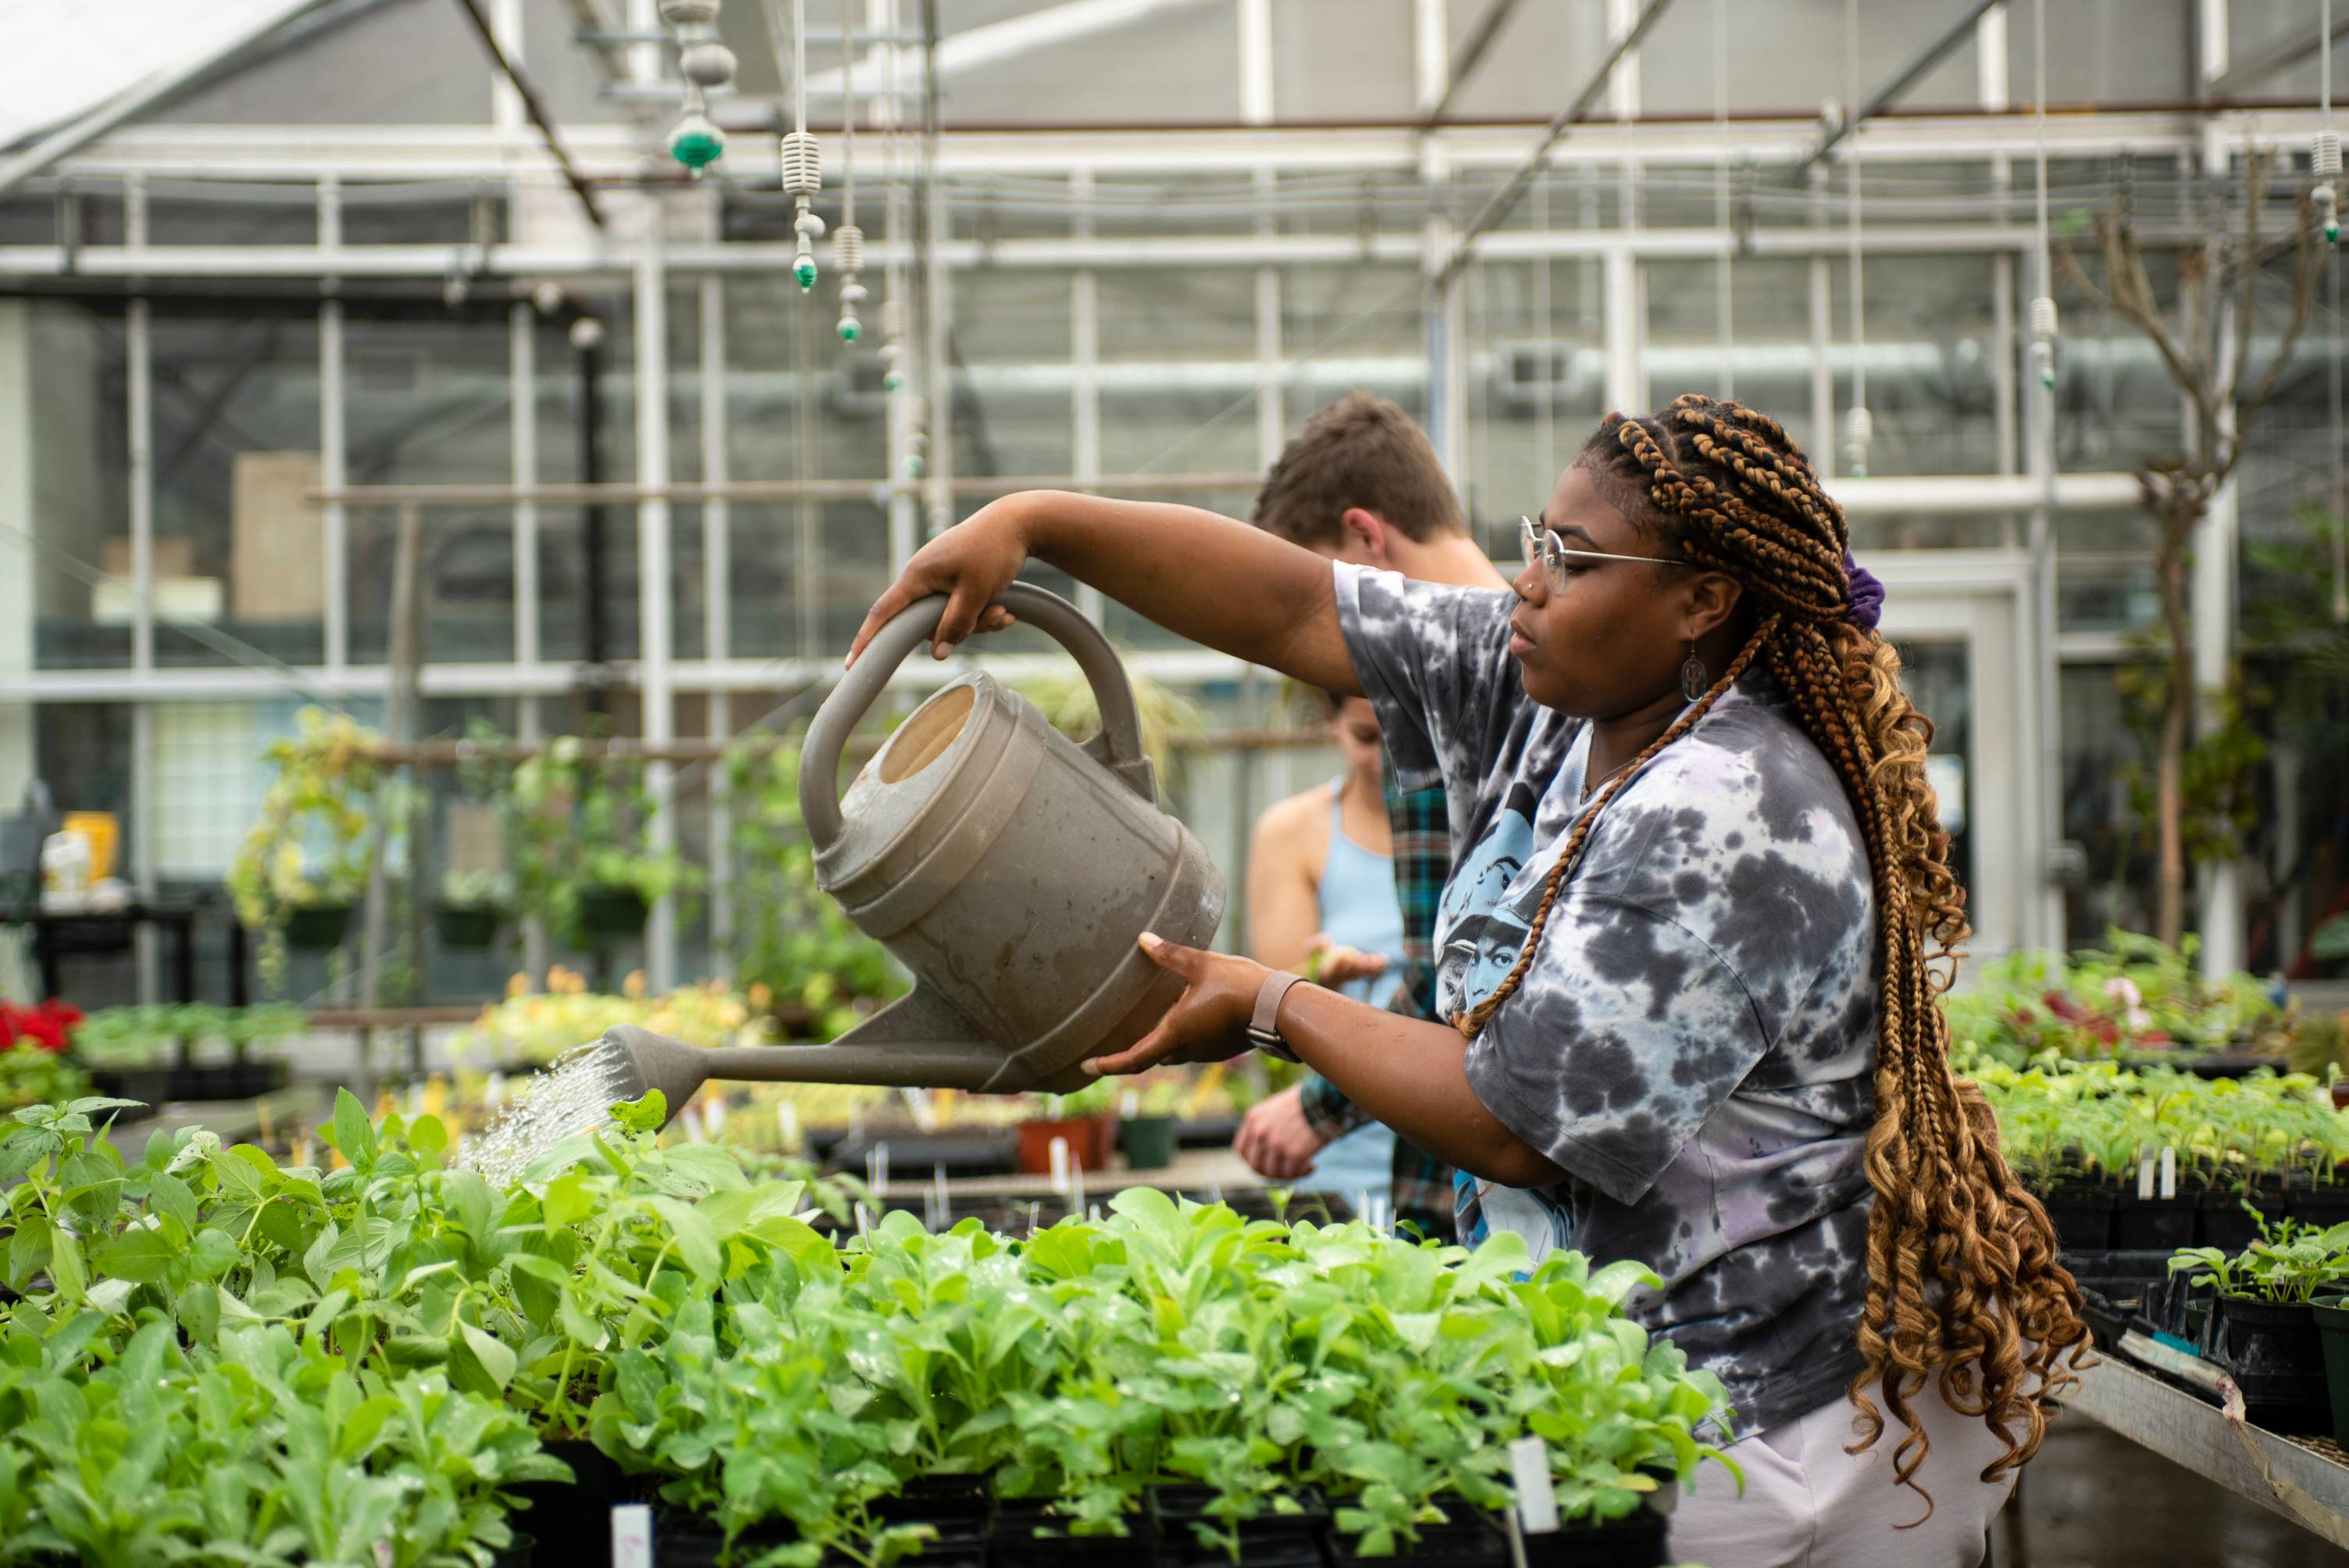 Student watering plants in the university greenhouse